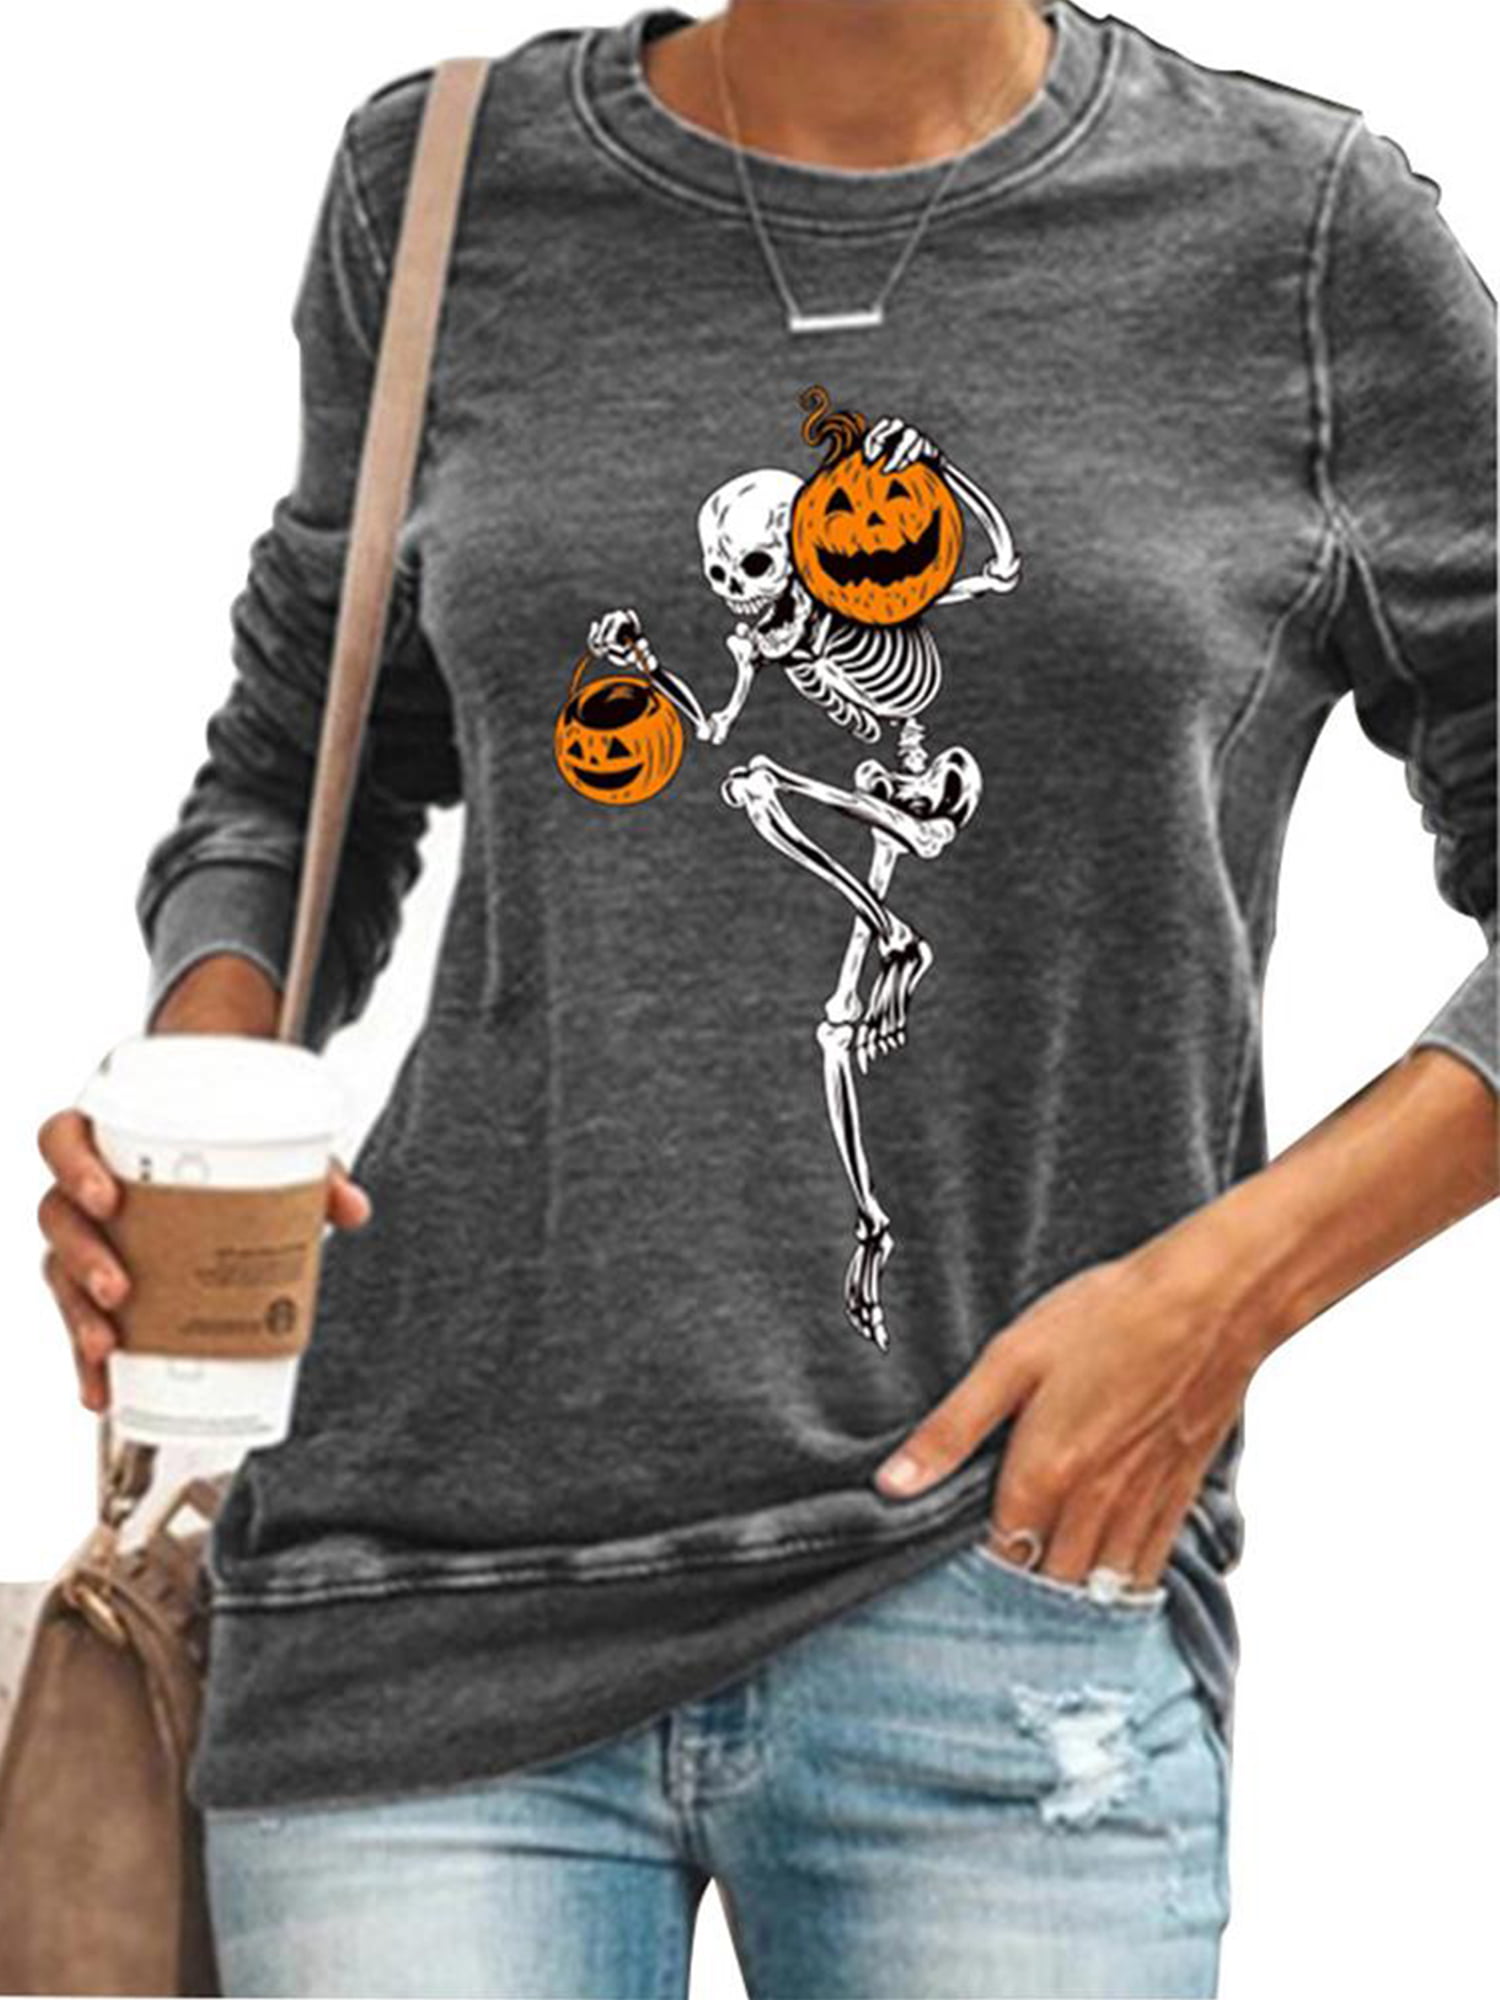 Halloween Long Sleeve Funny Skull Pumpkin Print Pullover Casual Loose Fit Sweatshirt Blouse Plus Size Tops for Women 